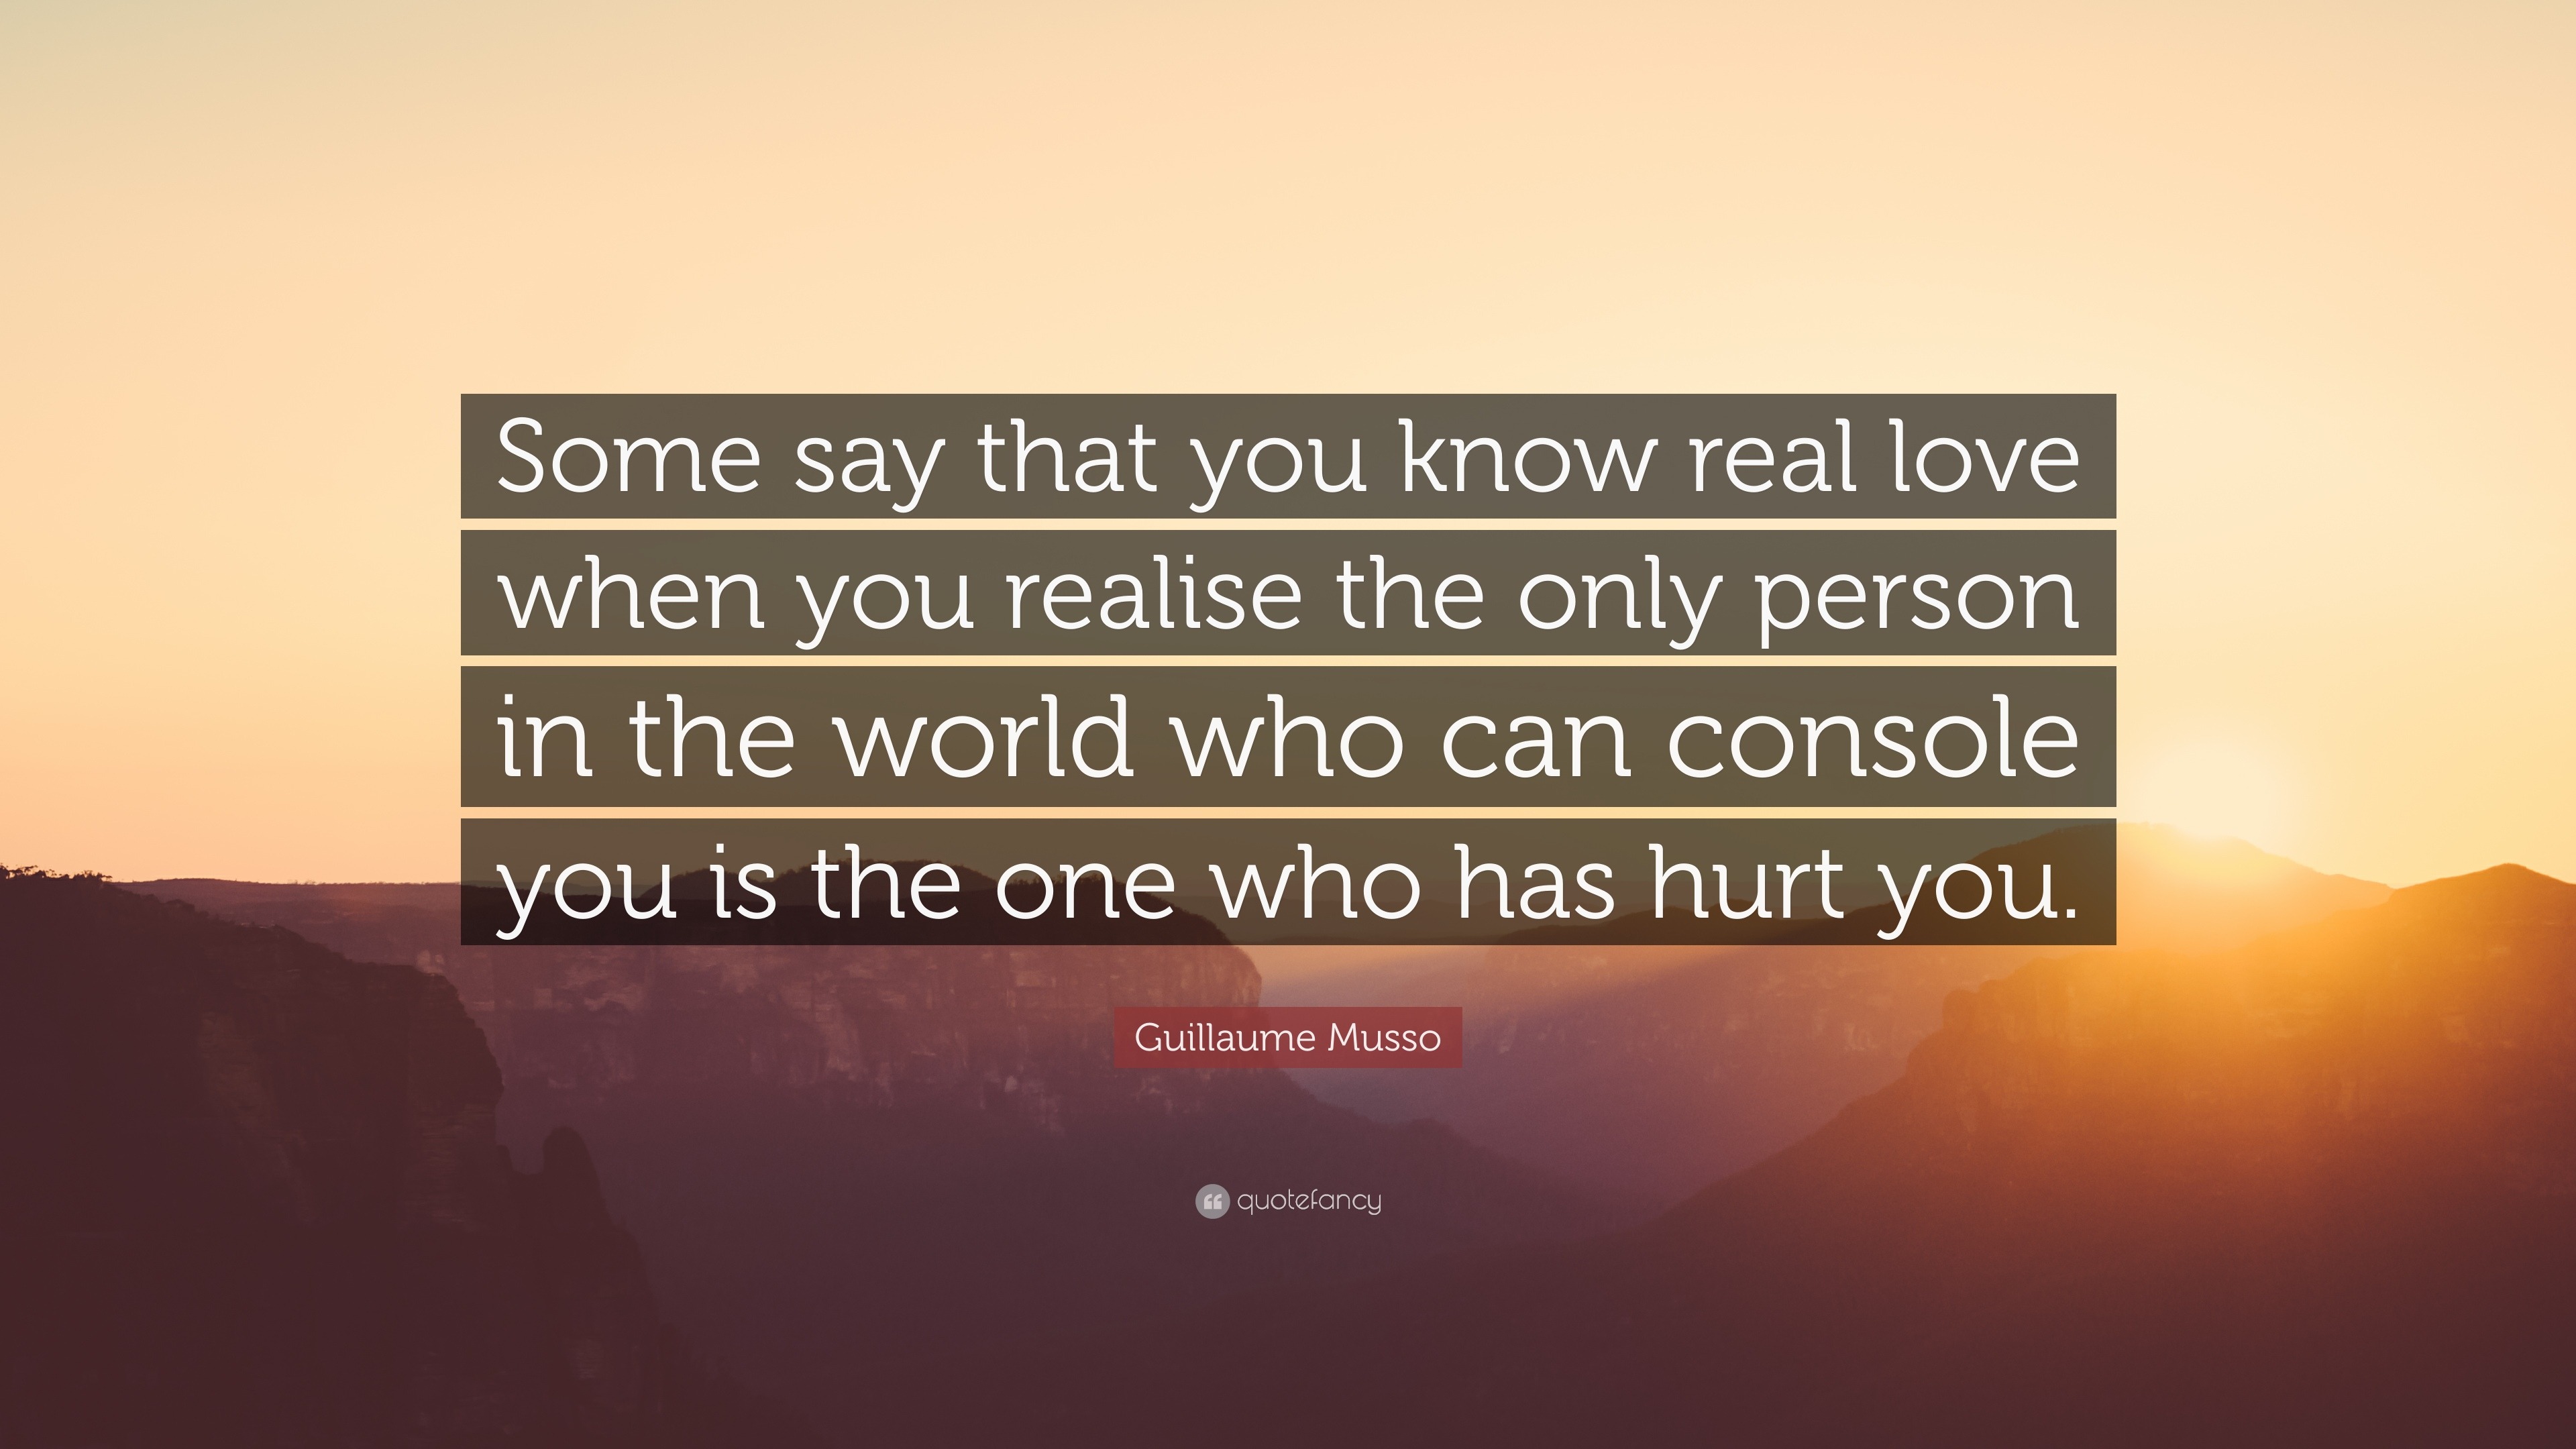 Guillaume Musso Quote “Some say that you know real love when you realise the